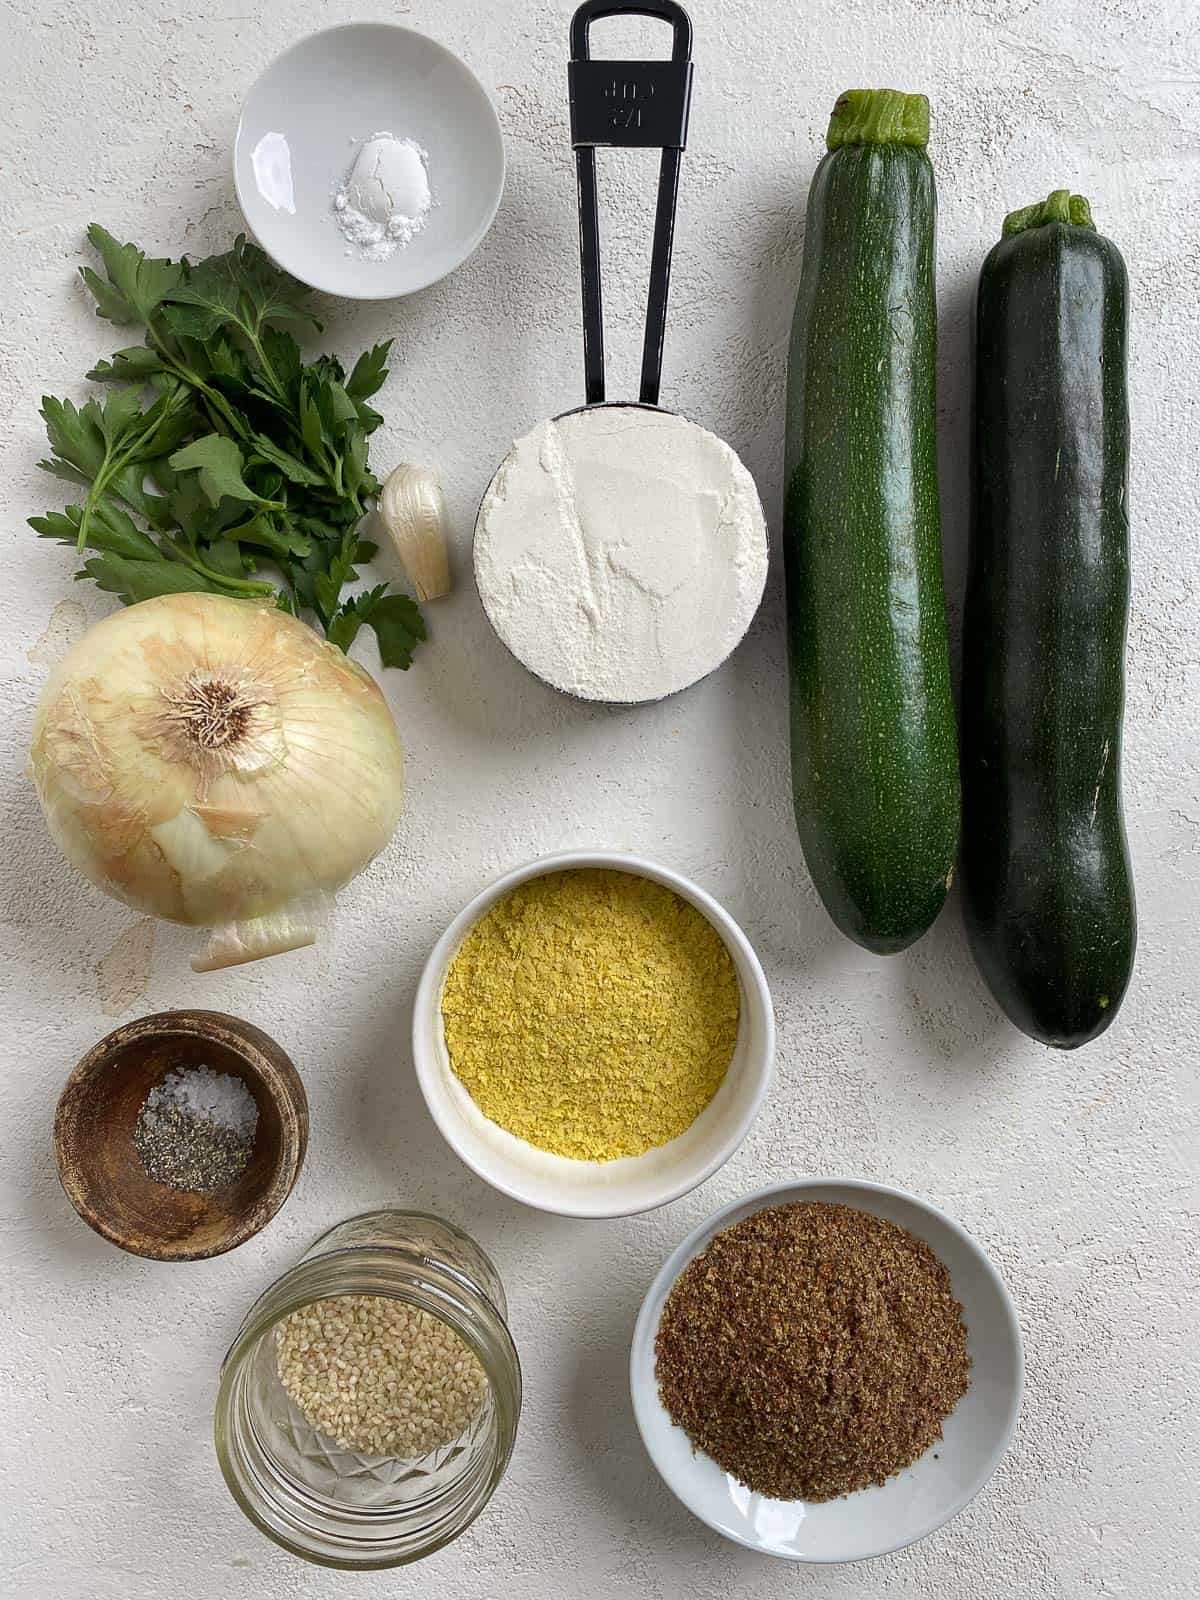 ingredients for Vegan Baked Zucchini Fritters measured out and separated on a white surface